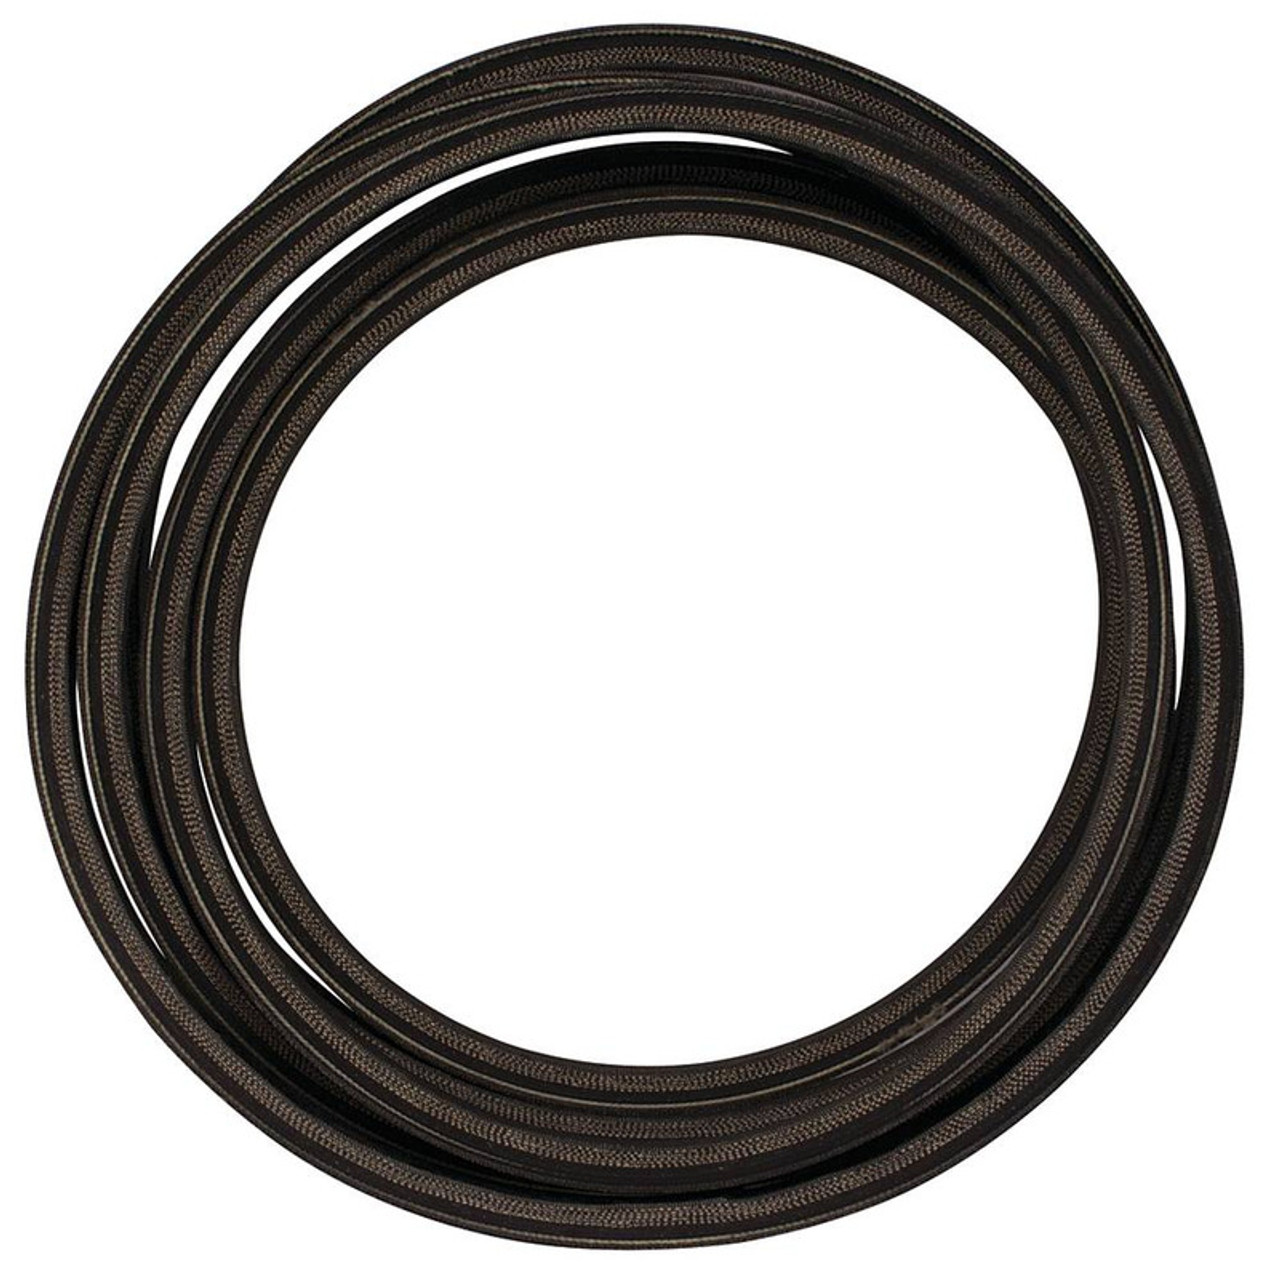 TORO 107-7723 V-BELT

Where Used: Part Number 107-7723
Model Name Diagram
74269, Z Master Professional 7000 Series Riding Mower, With 72in TURBO FORCE Side Discharge
Mower, 2012 (SN 312000001-31299999
DECK ASSEMBLY
74269, Z Master Professional 7000 Series Riding Mower, With 72in TURBO FORCE Side Discharge
Mower, 2013 (SN 313000001-31399999
DECK ASSEMBLY
74269, Z590-D Z Master, With 72in TURBO FORCE Side Discharge Mower, 2008 (SN 280000001-
280999999)
DECK ASSEMBLY
74269, Z590-D Z Master, With 72in TURBO FORCE Side Discharge Mower, 2009 (SN 290000001-
290999999)
DECK ASSEMBLY
74269, Z590-D Z Master, With 72in TURBO FORCE Side Discharge Mower, 2010 (SN 310000001-
310999999)
DECK ASSEMBLY
74269, Z590-D Z Master, With 72in TURBO FORCE Side Discharge Mower, 2011 (SN 311000001-
311999999)
DECK ASSEMBLY
74269, Z597-D Z Master, With 72in TURBO FORCE Side Discharge Mower, 2004 (SN 240000001-
240999999)
DECK ASSEMBLY
74269, Z597-D Z Master, With 72in TURBO FORCE Side Discharge Mower, 2005 (SN 250000001-
250999999)
DECK ASSEMBLY
74269, Z597-D Z Master, With 72in TURBO FORCE Side Discharge Mower, 2006 (SN 260000001-
260999999)
DECK ASSEMBLY
74269, Z597-D Z Master, With 72in TURBO FORCE Side Discharge Mower, 2007 (SN 270000001-
270000300)
DECK ASSEMBLY
74269, Z597-D Z Master, With 72in TURBO FORCE Side Discharge Mower, 2007 (SN 270000301-
270999999)
DECK ASSEMBLY
74269CP, Z590-D Z Master, With 72in TURBO FORCE Side Discharge Mower, 2008 (SN 280000001-
280999999)
DECK ASSEMBLY
74269CP, Z597-D Z Master, With 72in TURBO FORCE Side Discharge Mower, 2007 (SN 270000001-
270999999)
DECK ASSEMBLY
74269TE, Z597-D Z Master, With 182cm TURBO FORCE Side Discharge Mower, 2006 (SN 260000001
-260999999)
DECK ASSEMBLY
74269TE, Z597-D Z Master, With 182cm TURBO FORCE Side Discharge Mower, 2007 (SN 270000001
-270999999)
DECK ASSEMBLY
74280TE, Z597-D Z Master, With 62 Rear Discharge Mower, 2006 (SN 260000001-260999999) DECK ASSEMBLY
74280TE, Z597-D Z Master, With 62 Rear Discharge Mower, 2007 (SN 270000001-270999999) DECK ASSEMBLY
